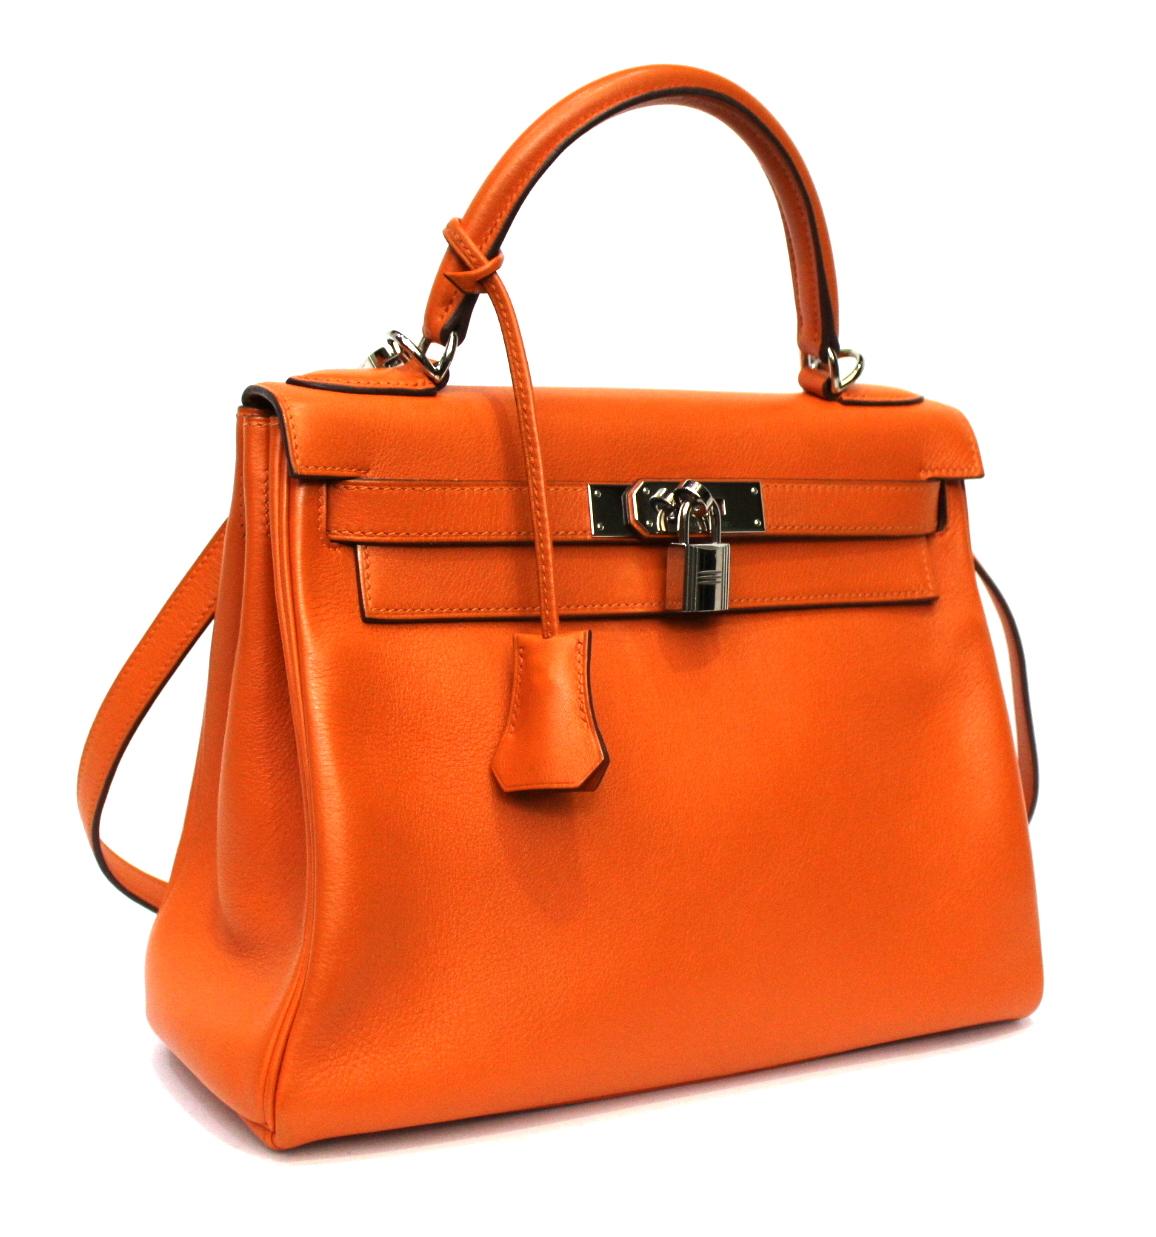 Hermès bag Kelly model 28 made of soft orange leather with silver hardware.

This timeless bag is in excellent condition, equipped with an original dustbag.

year 2006.